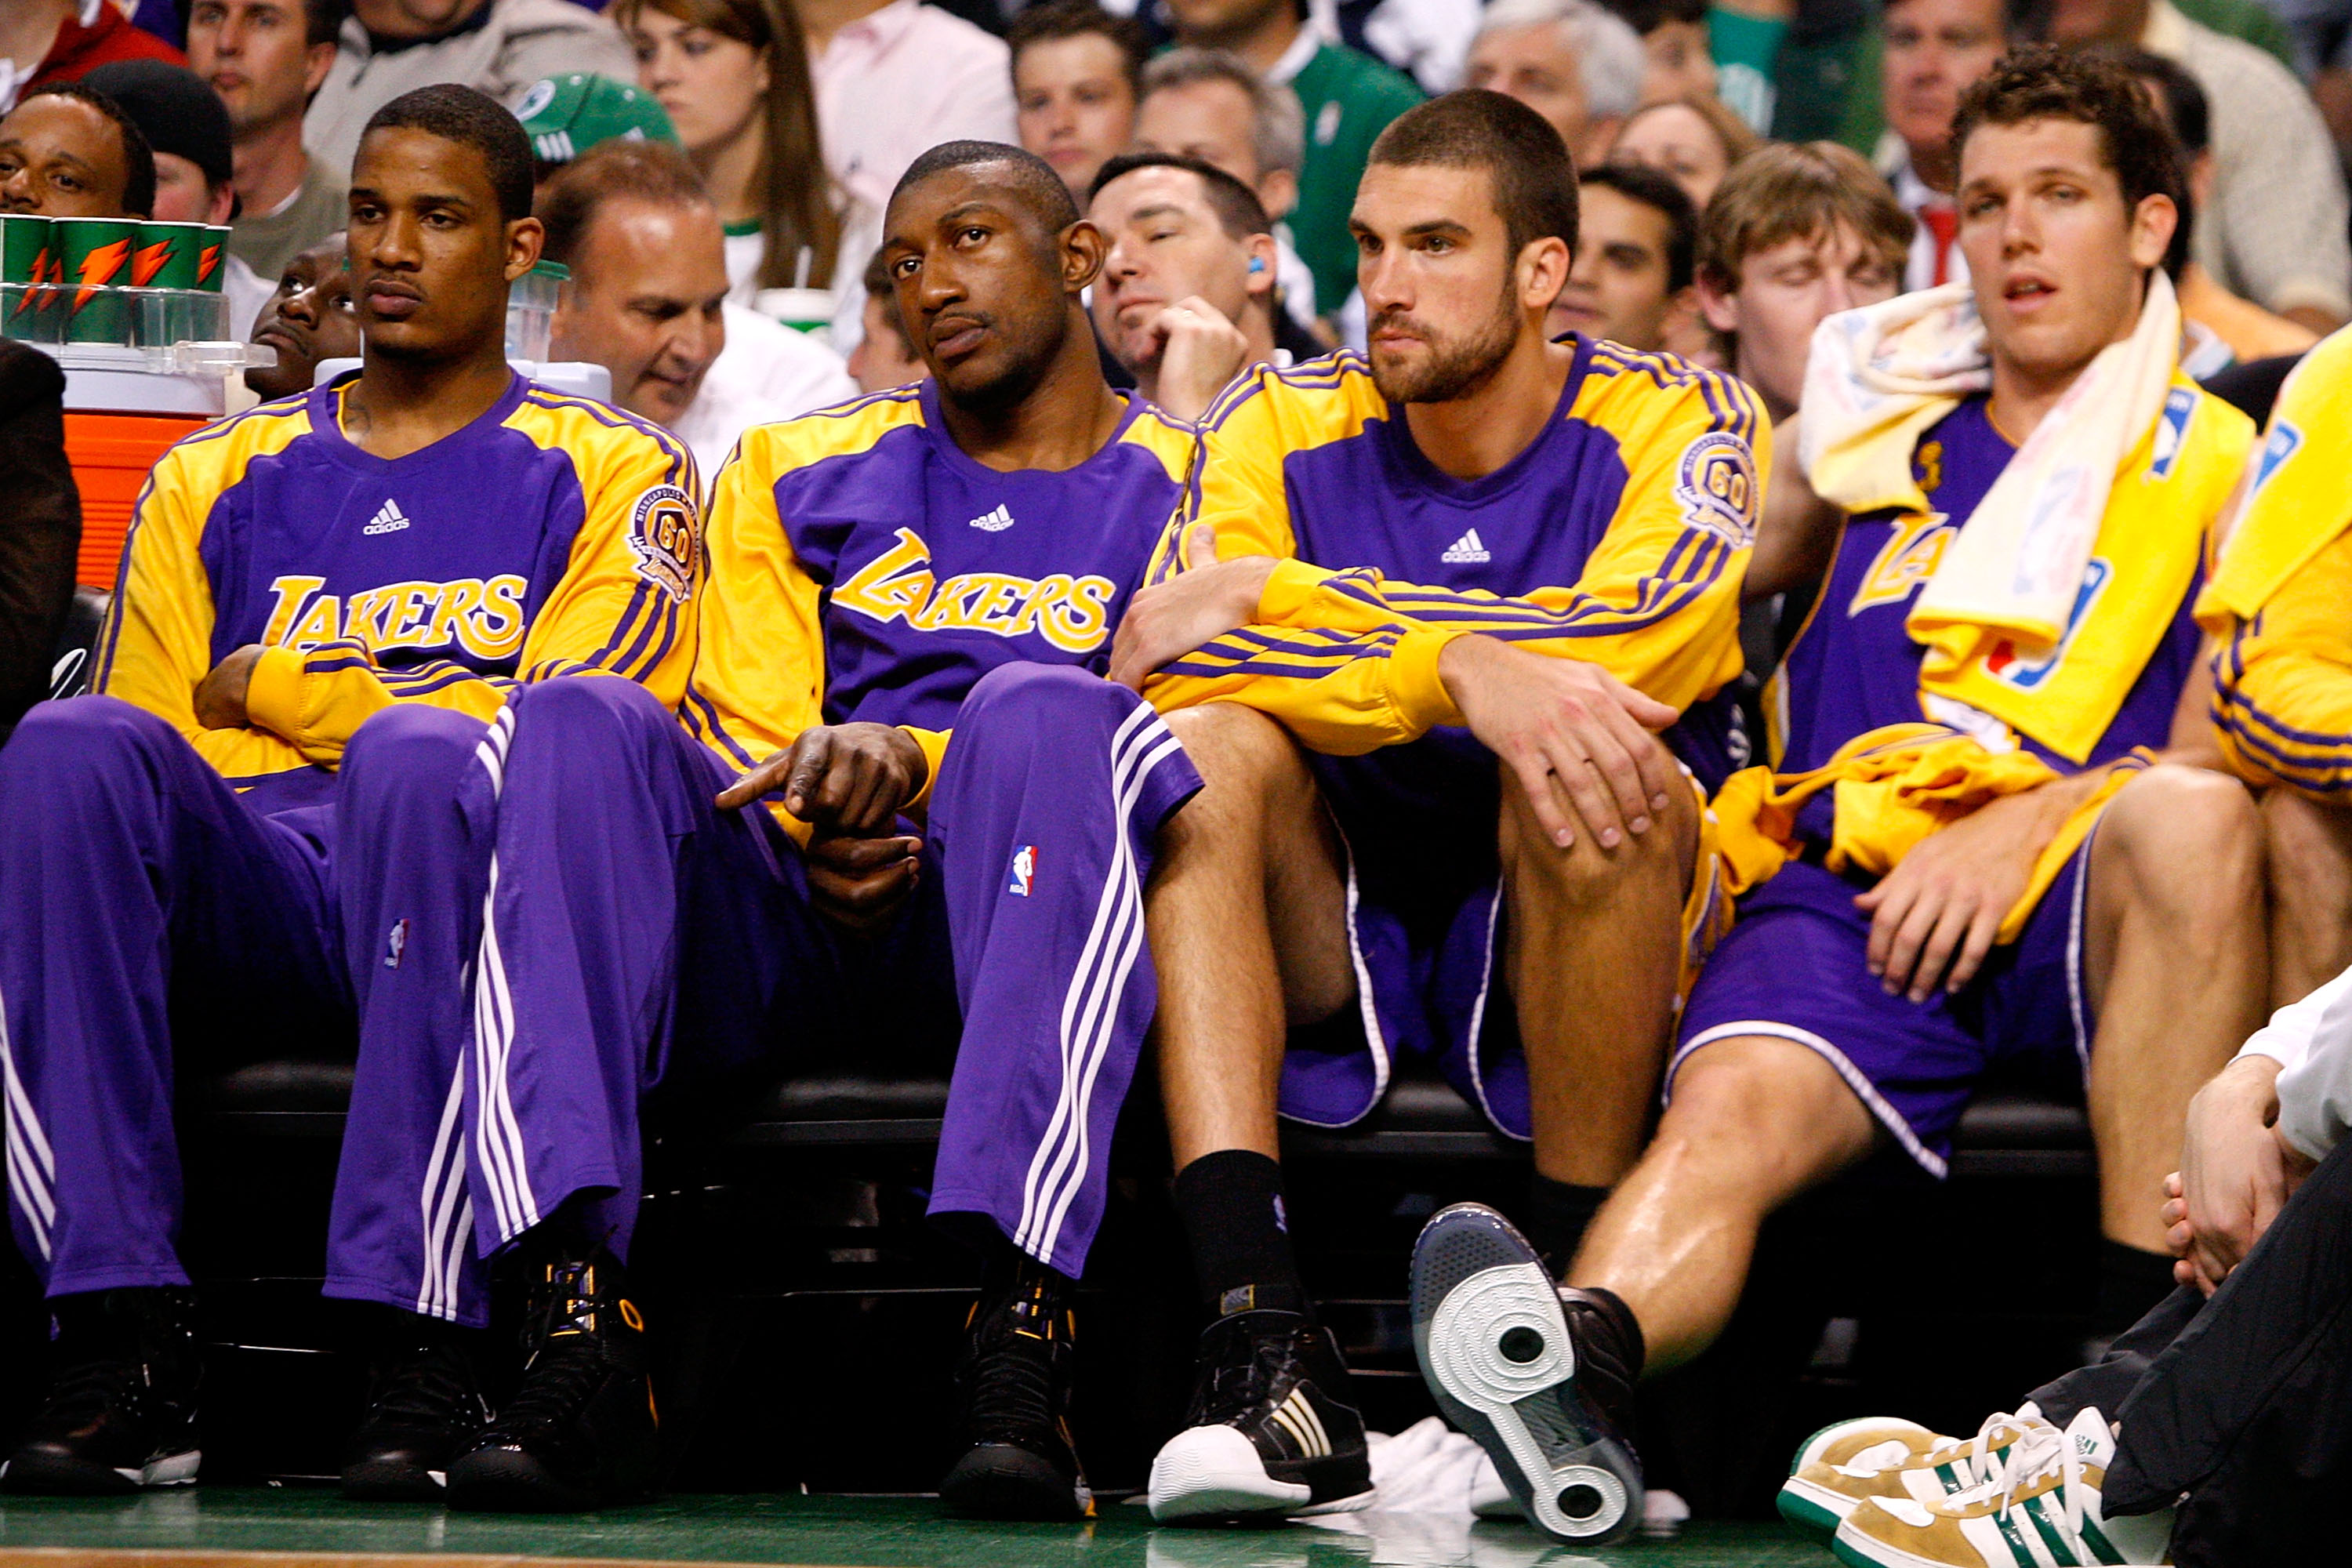 BOSTON - JUNE 05:  (L-R) Trevor Ariza #3, DJ Mbenga #28, Chris Mihm #31 and Luke Walton #4 of the Los Angeles Lakers watch the final moments of the Lakers' loss to the Boston Celtics in Game One of the 2008 NBA Finals on June 5, 2008 at TD Banknorth Garde